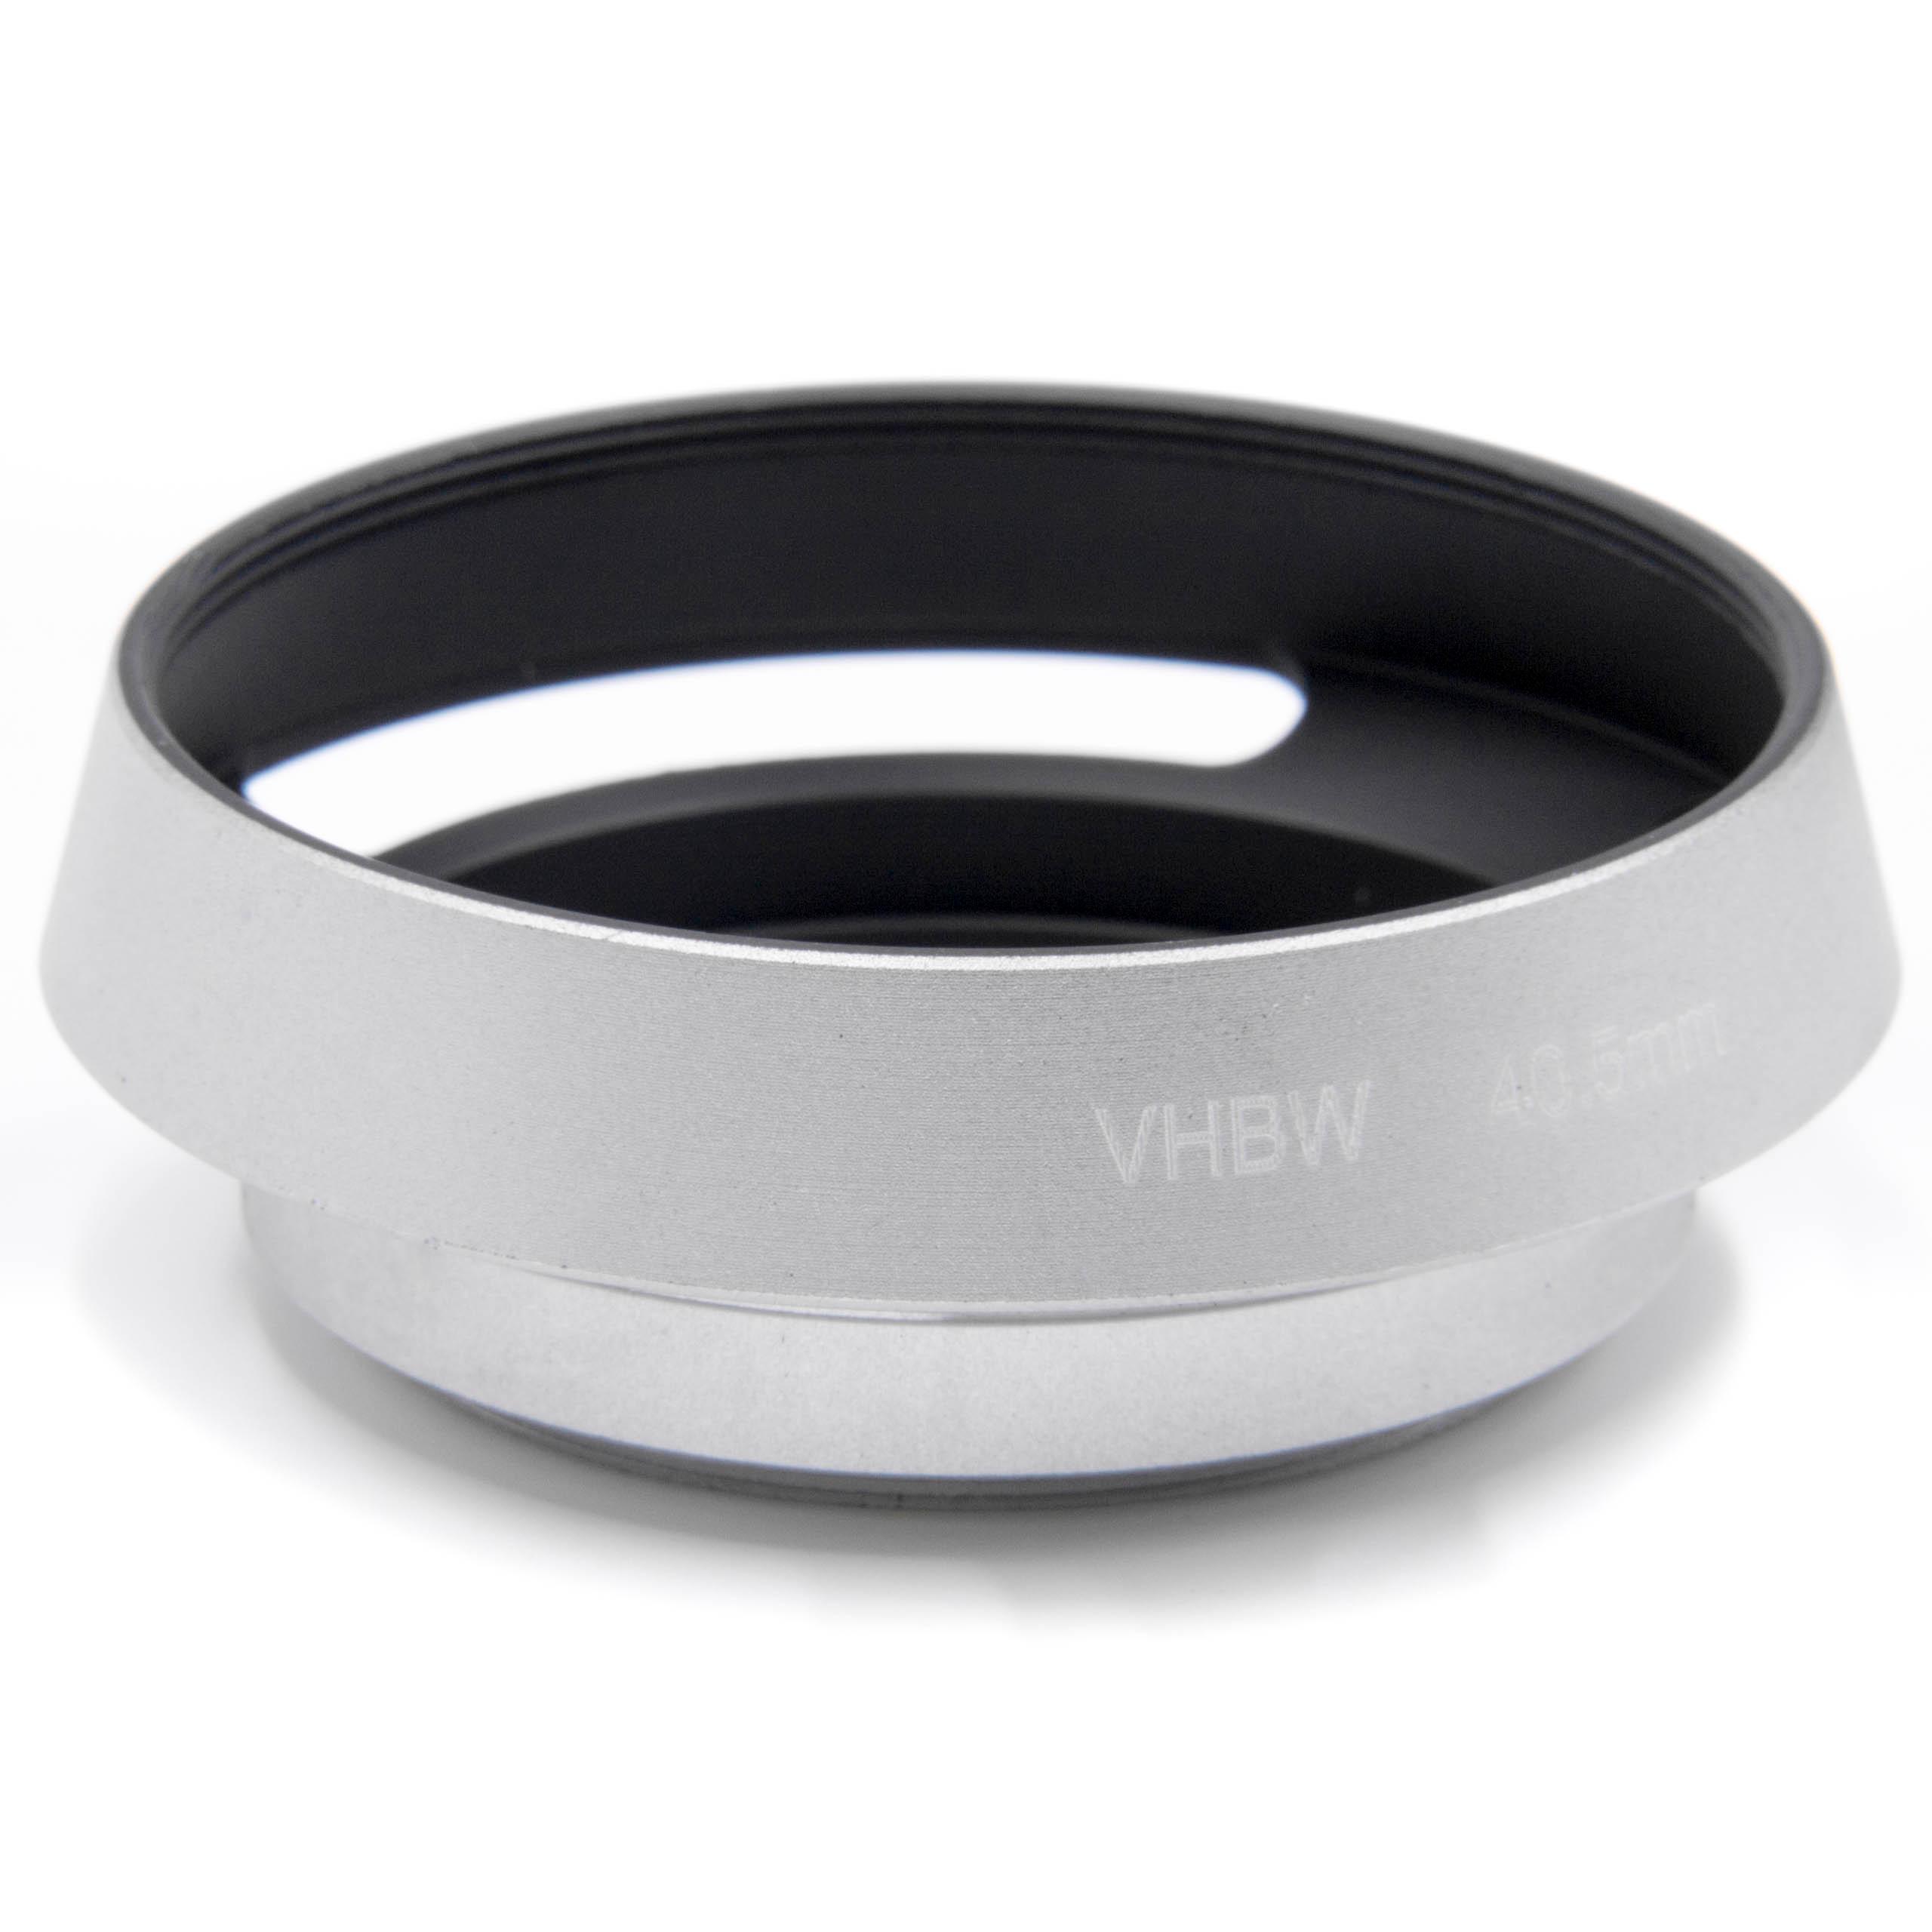 Lens Hood suitable for 40.5mm Lens - Lens Shade Silver, Round